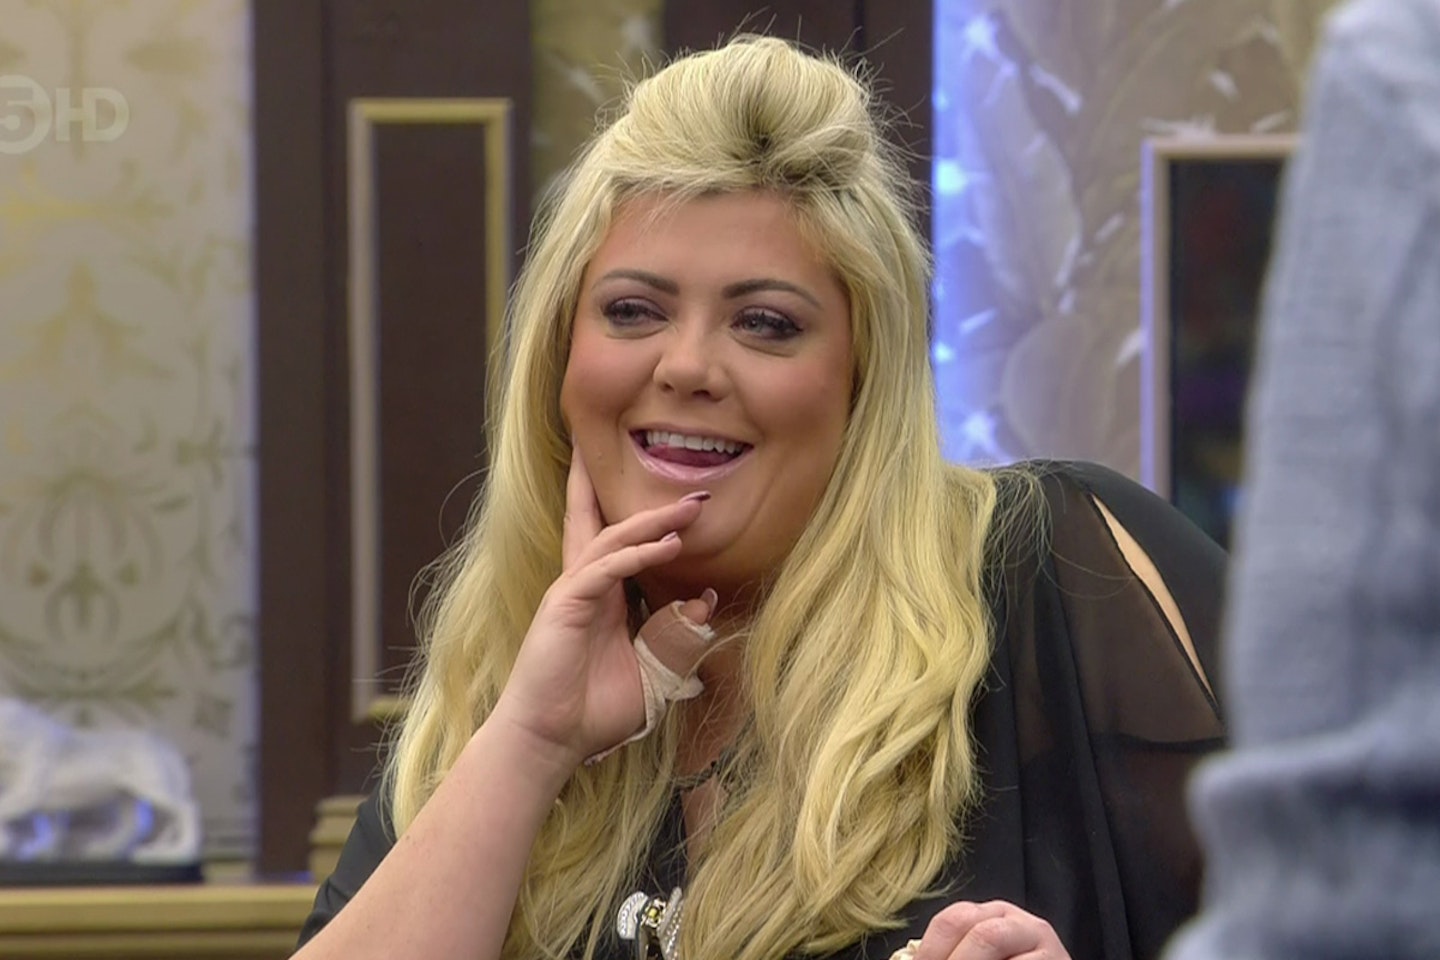 gemma collins in the cbb house